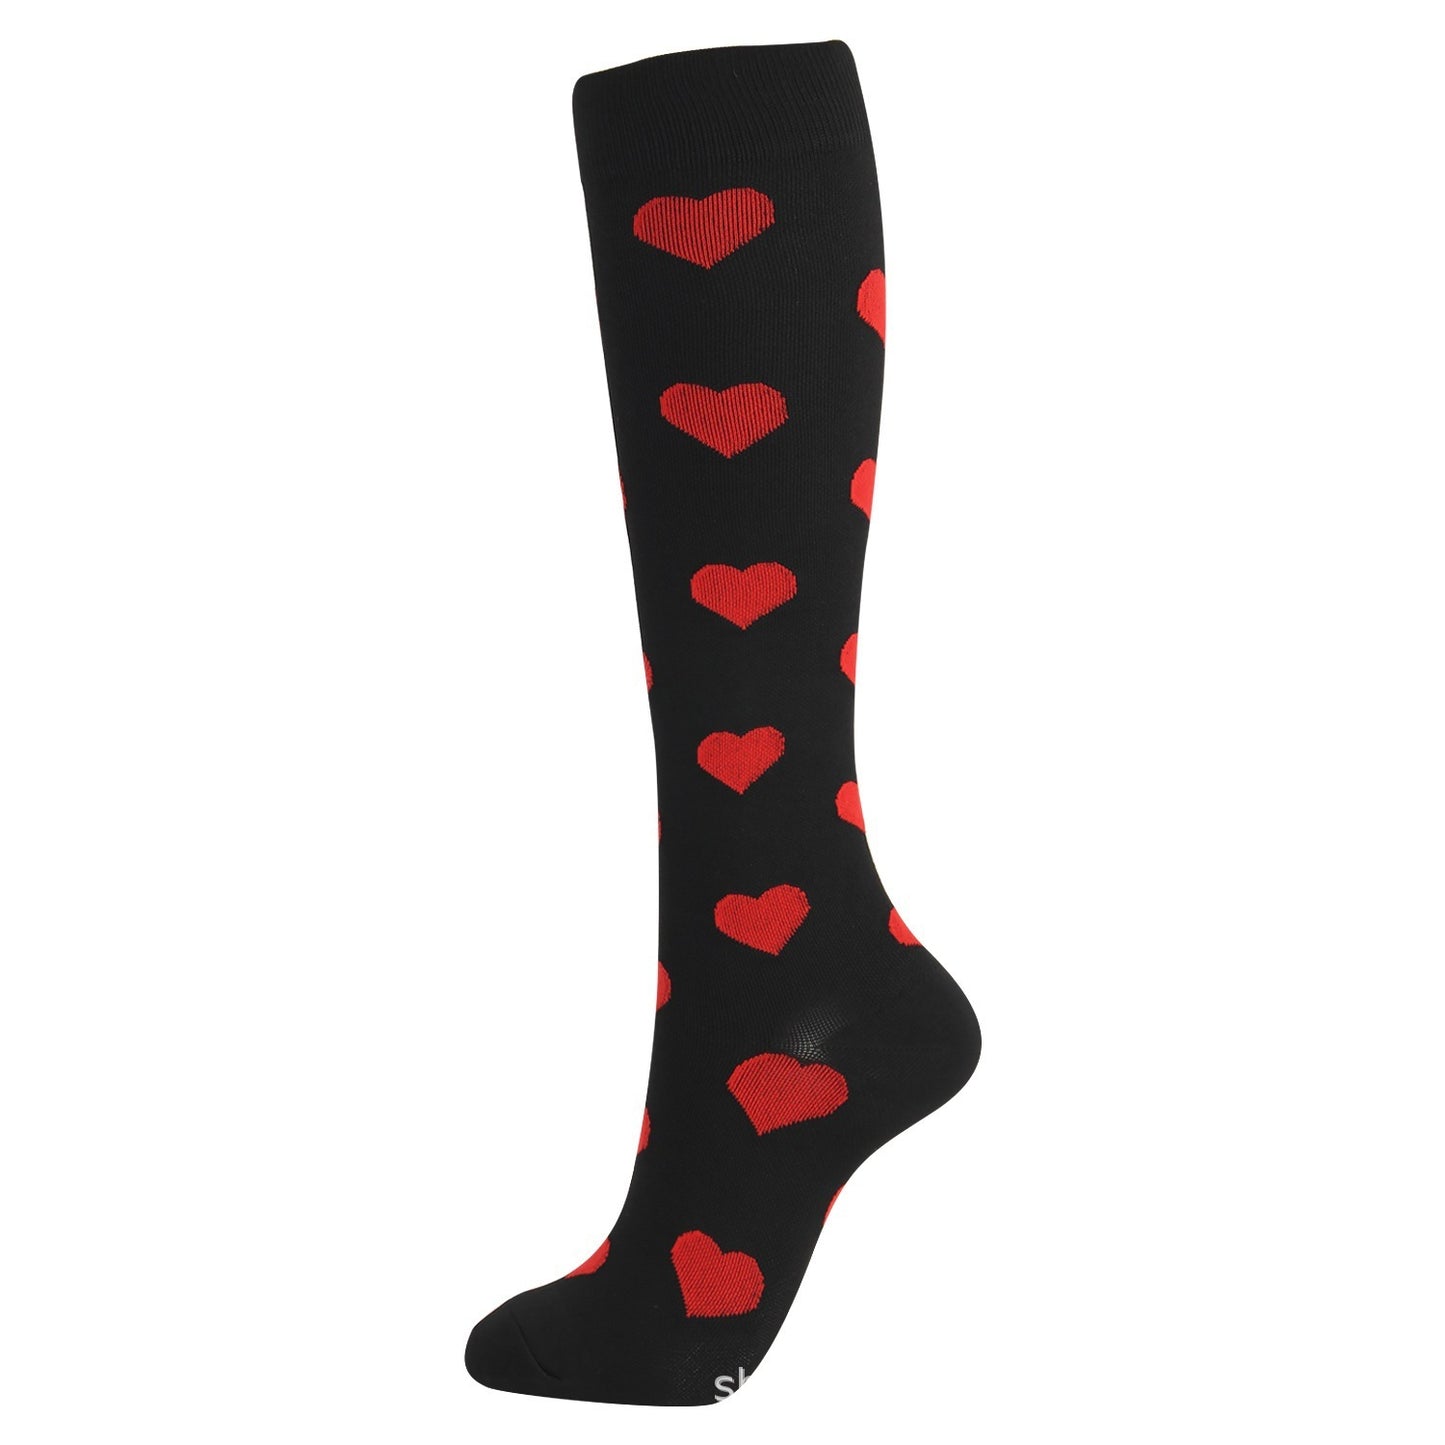 Long Compression Socks For Outdoor